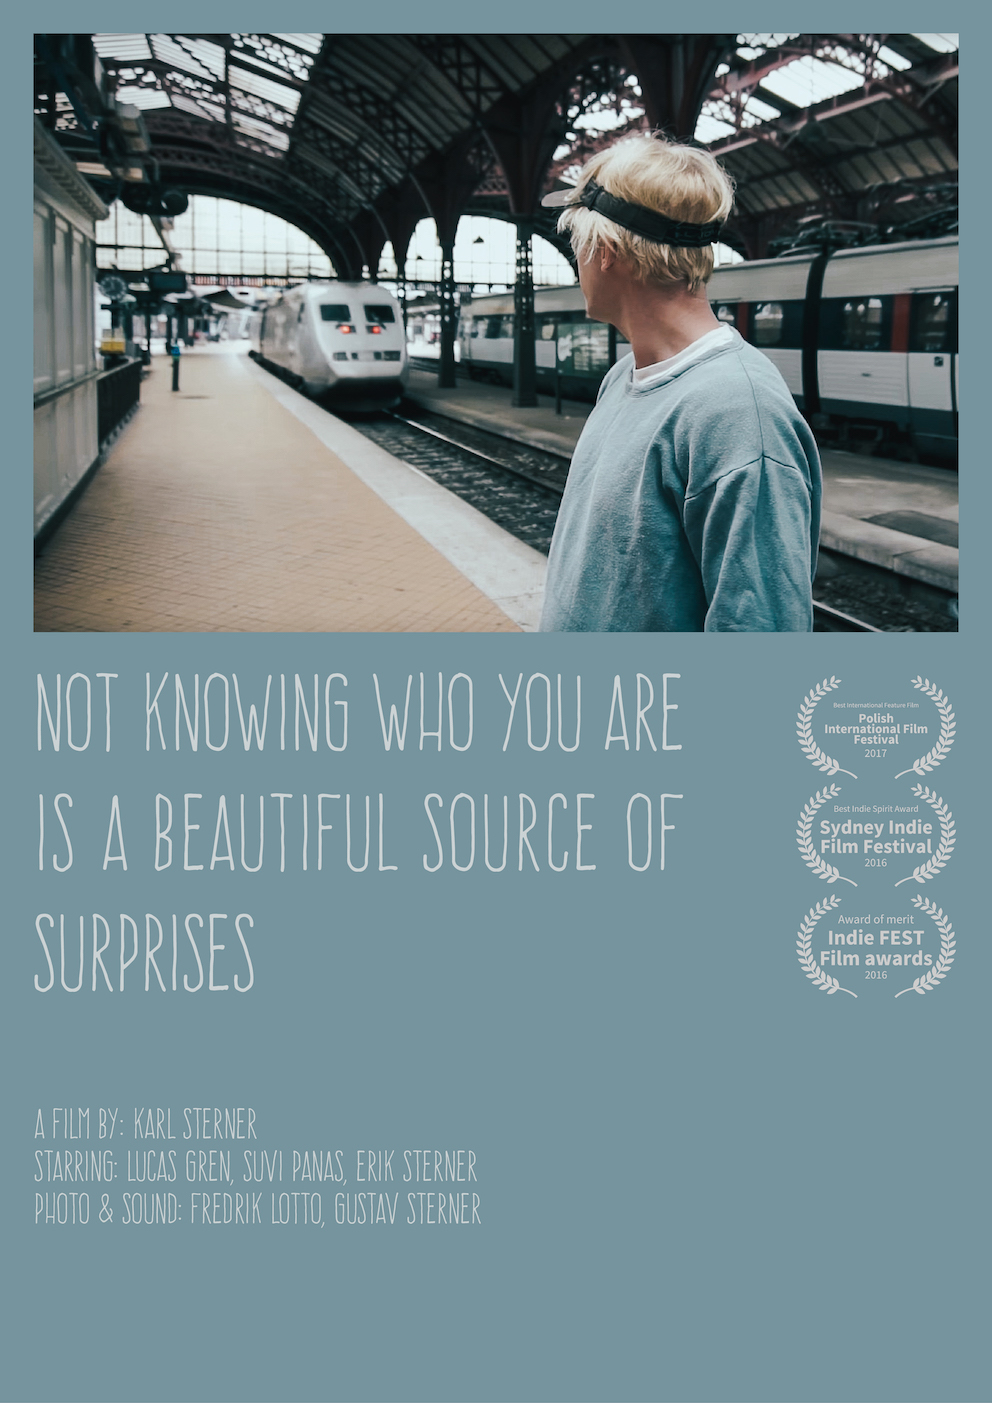 Omslag till filmen: Not knowing who you are is a beautiful source of surprises